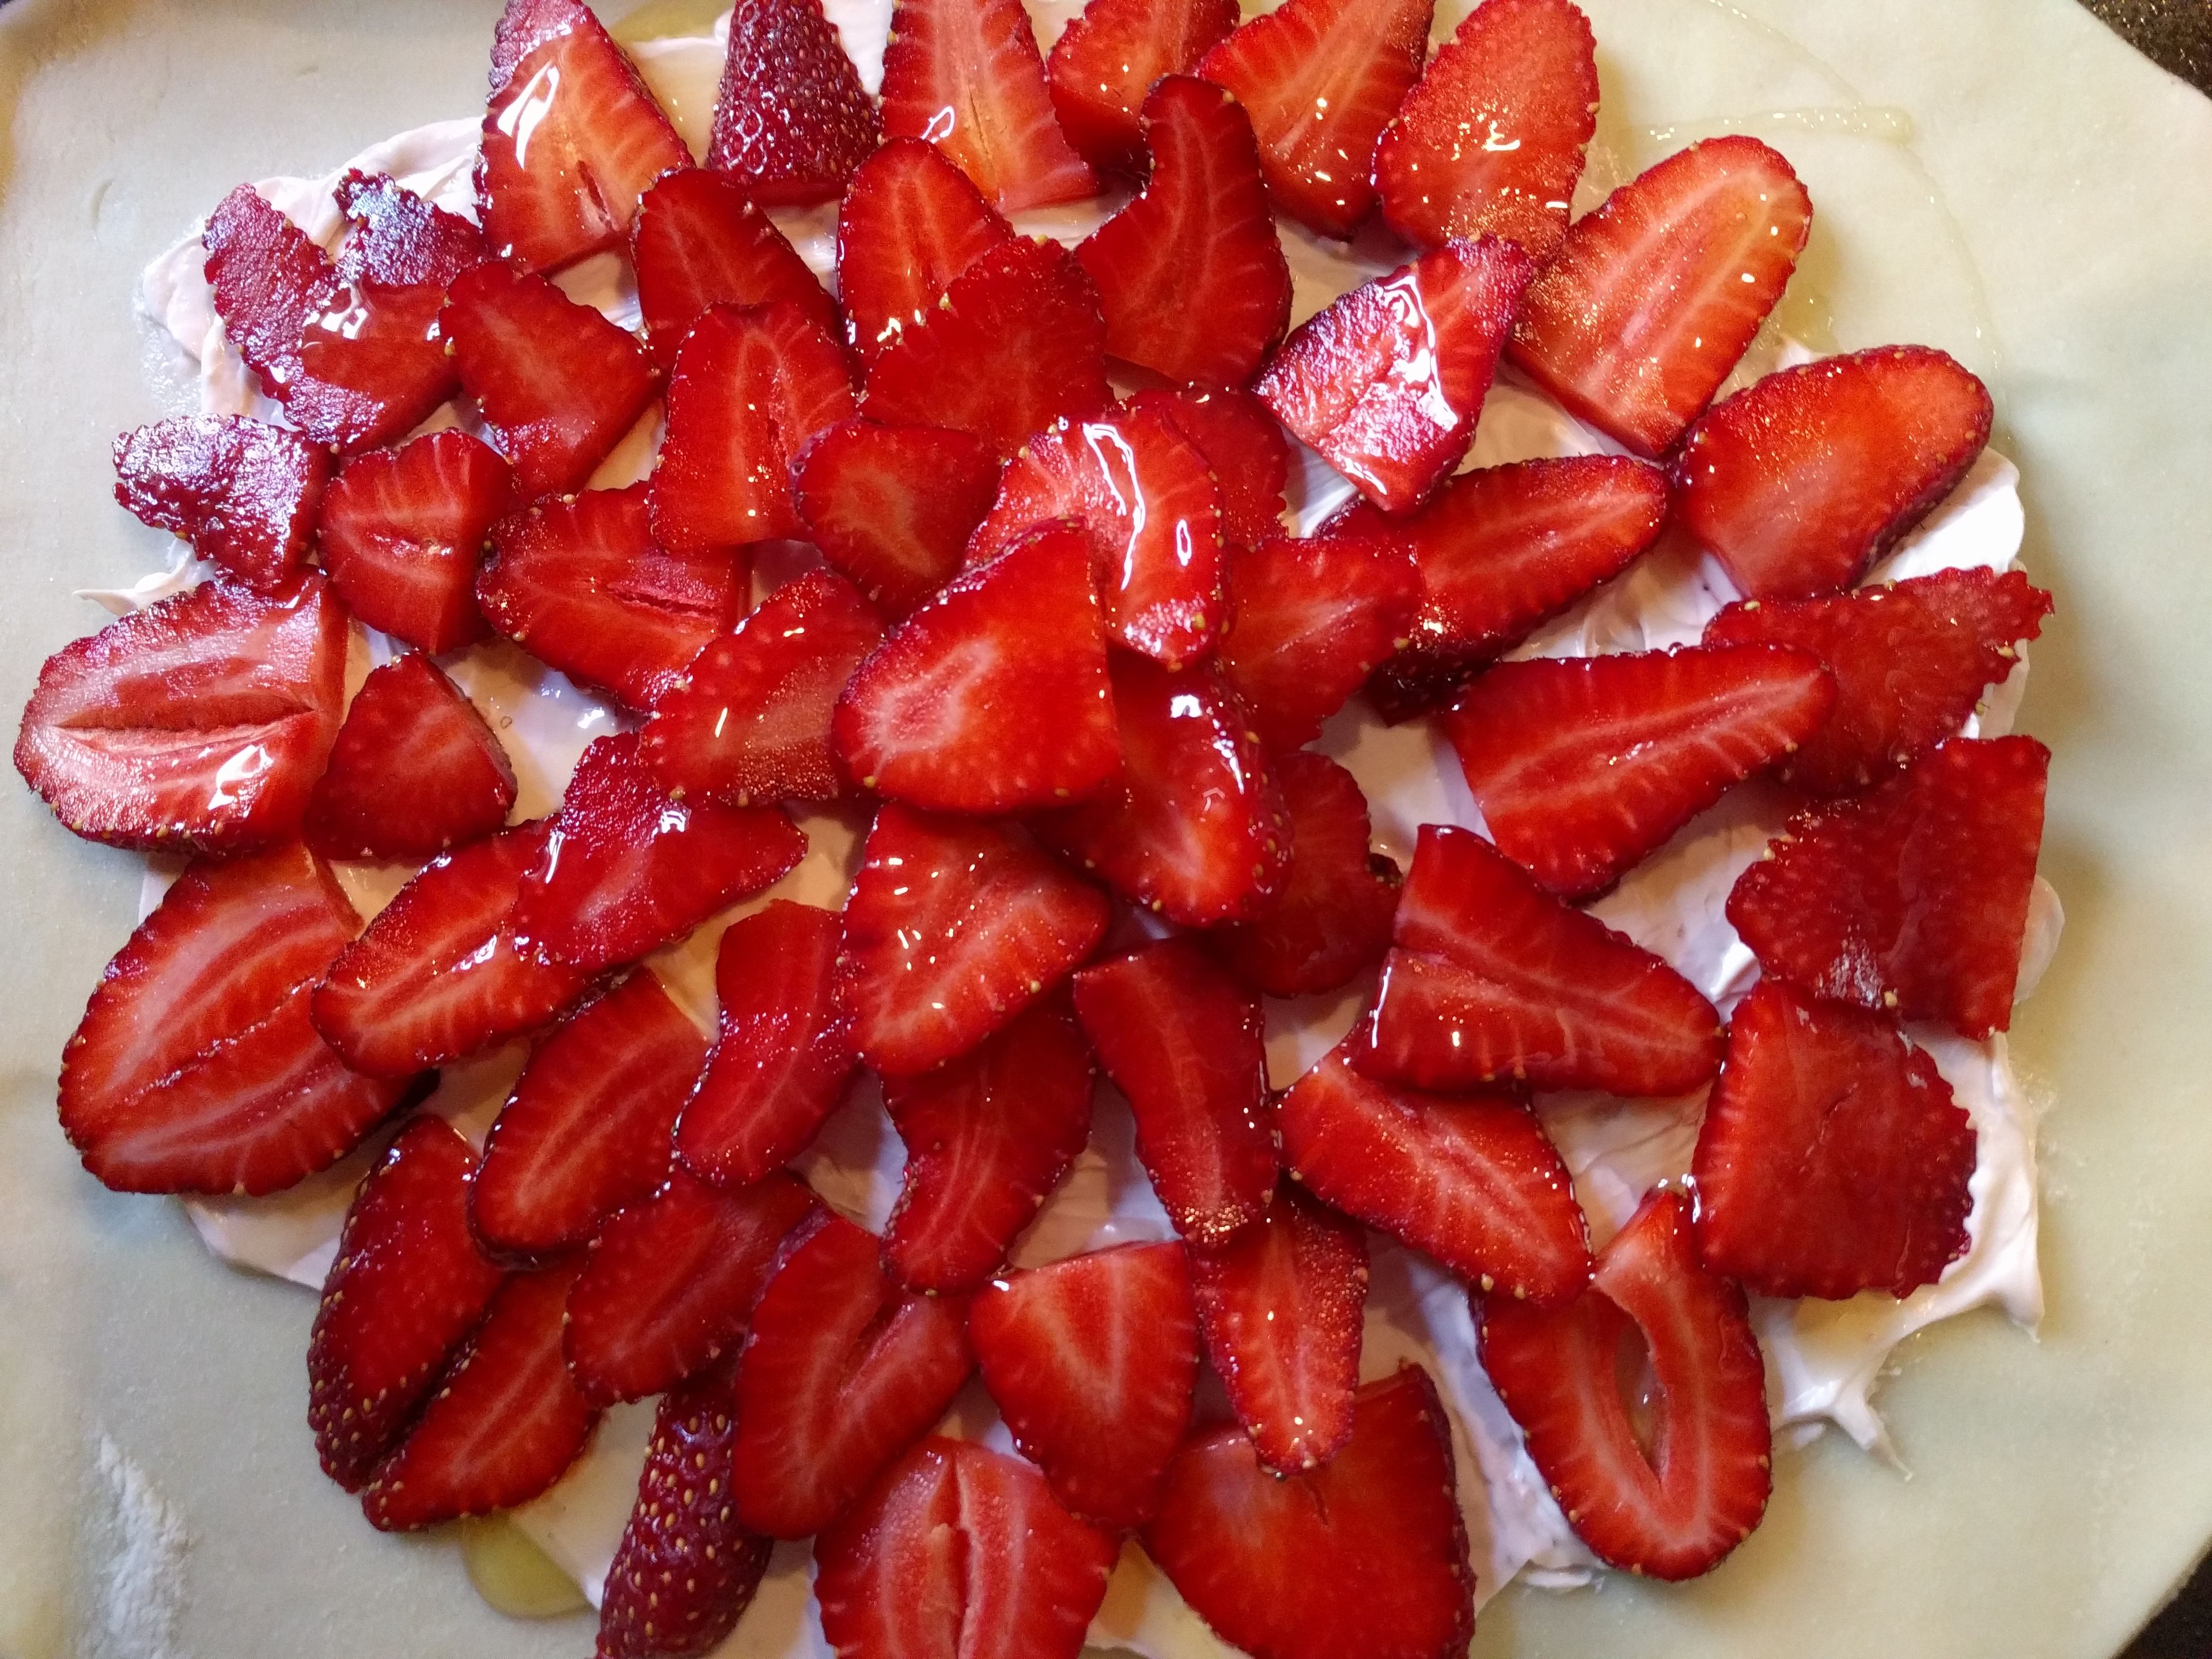 Spray nonstick cooking spray on a baking sheet. Spread pie crust across the baking sheet. Spread a thin layer of strawberry cream cheese onto the crust. Slice and arrange strawberries in any pattern you wish.